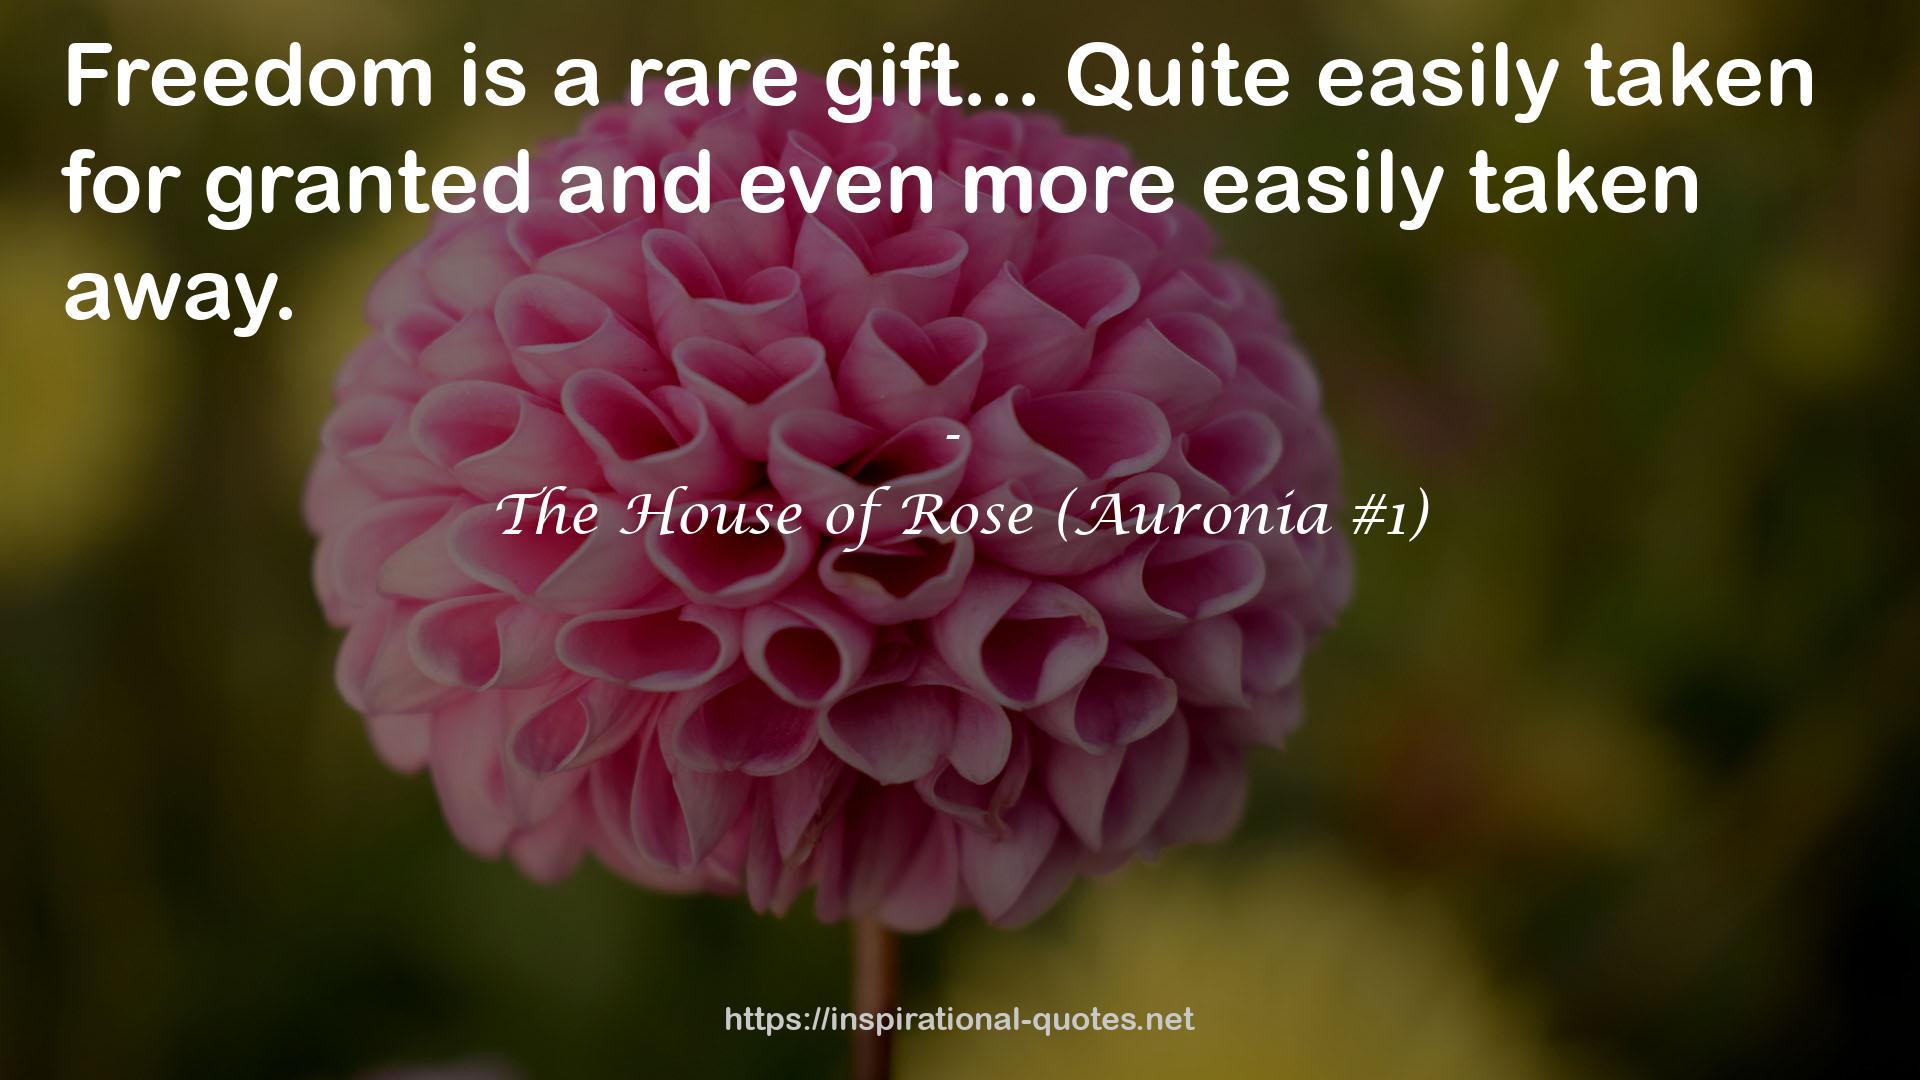 The House of Rose (Auronia #1) QUOTES